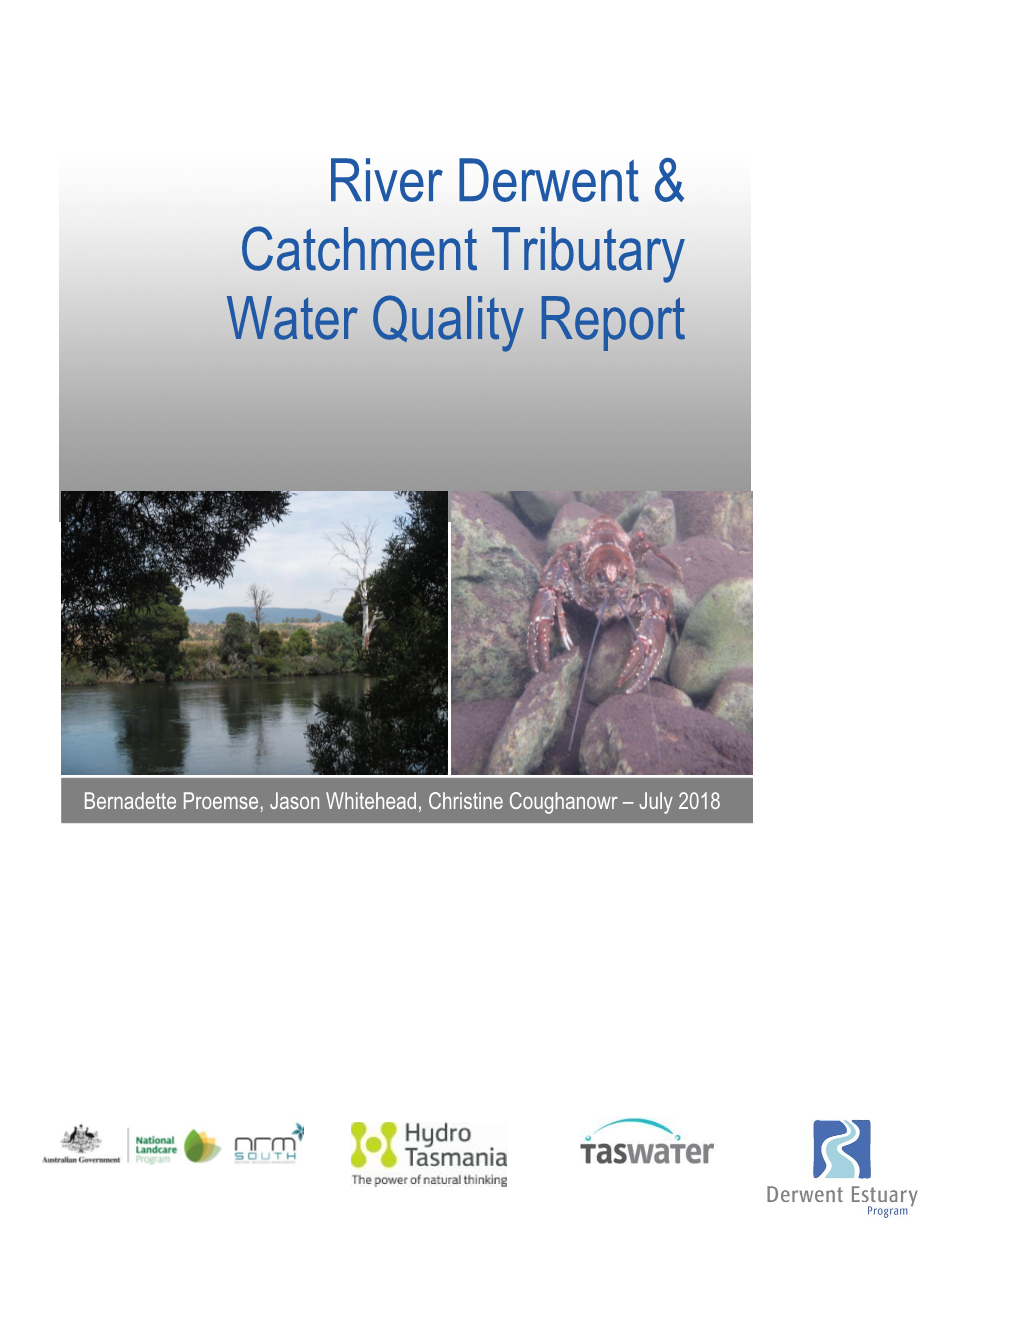 River Derwent & Catchment Tributary Water Quality Report 2018